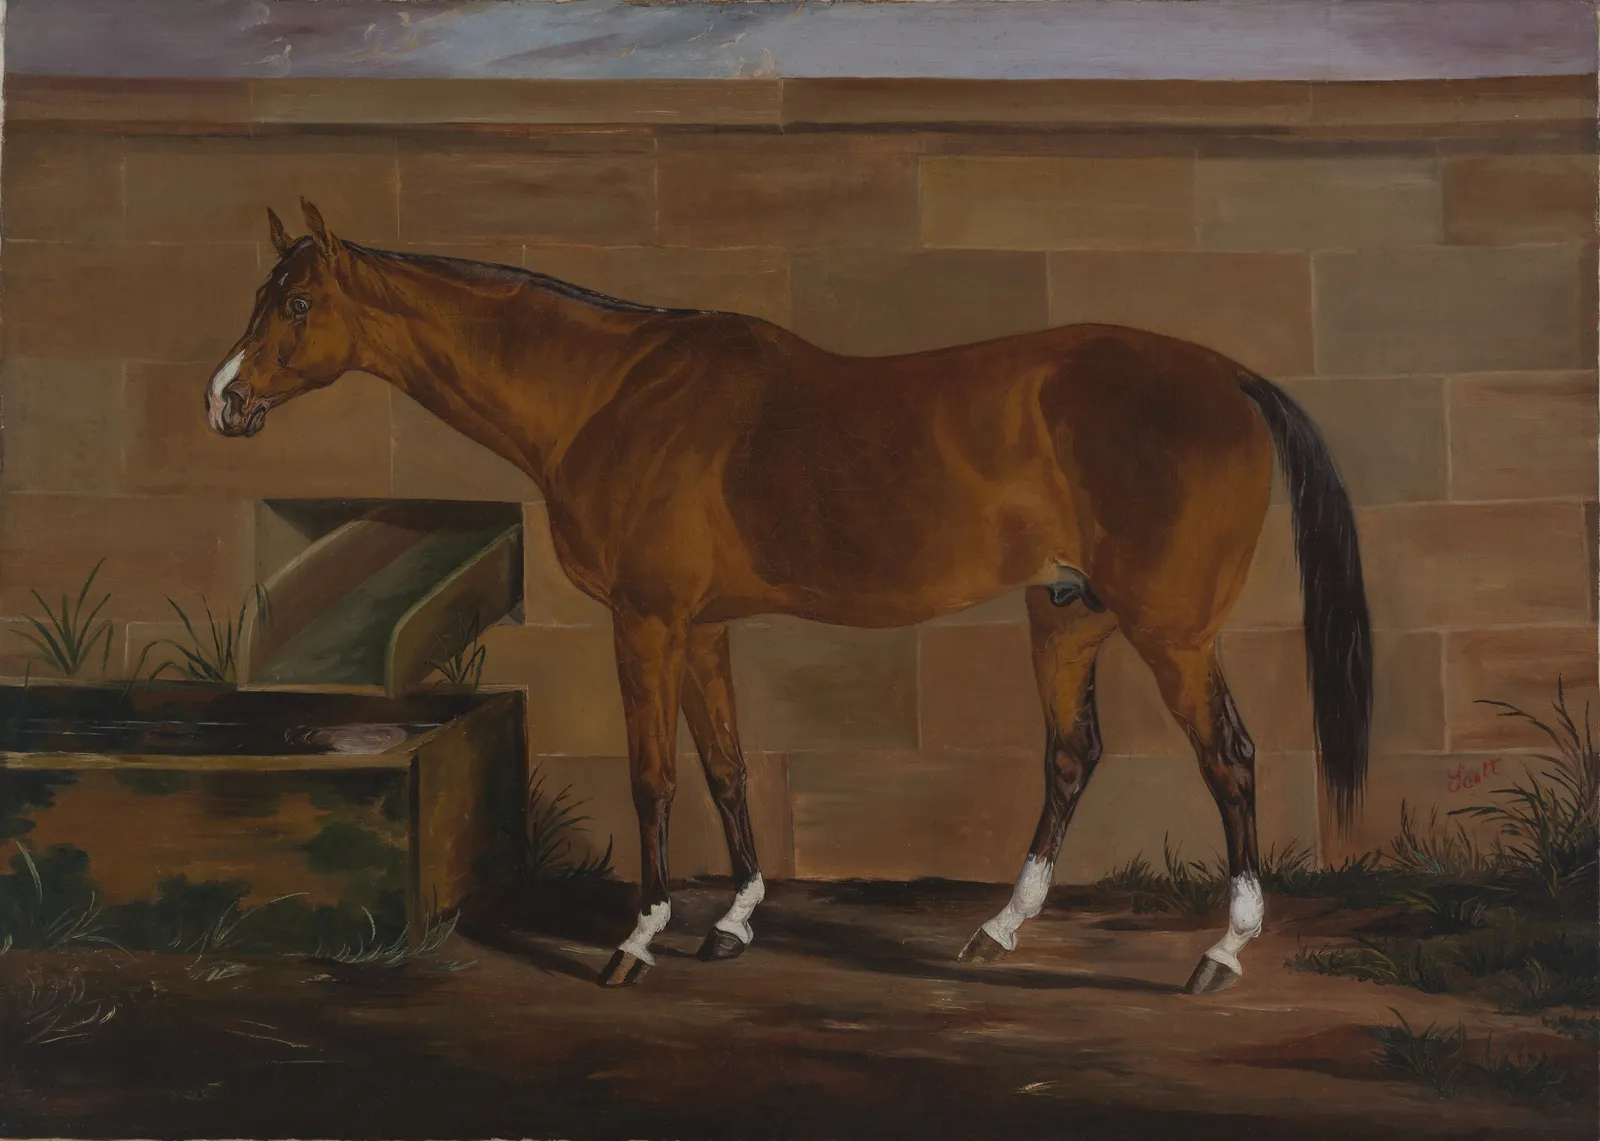 The Lost Story of Lexington, the RecordBreaking Thoroughbred, Races